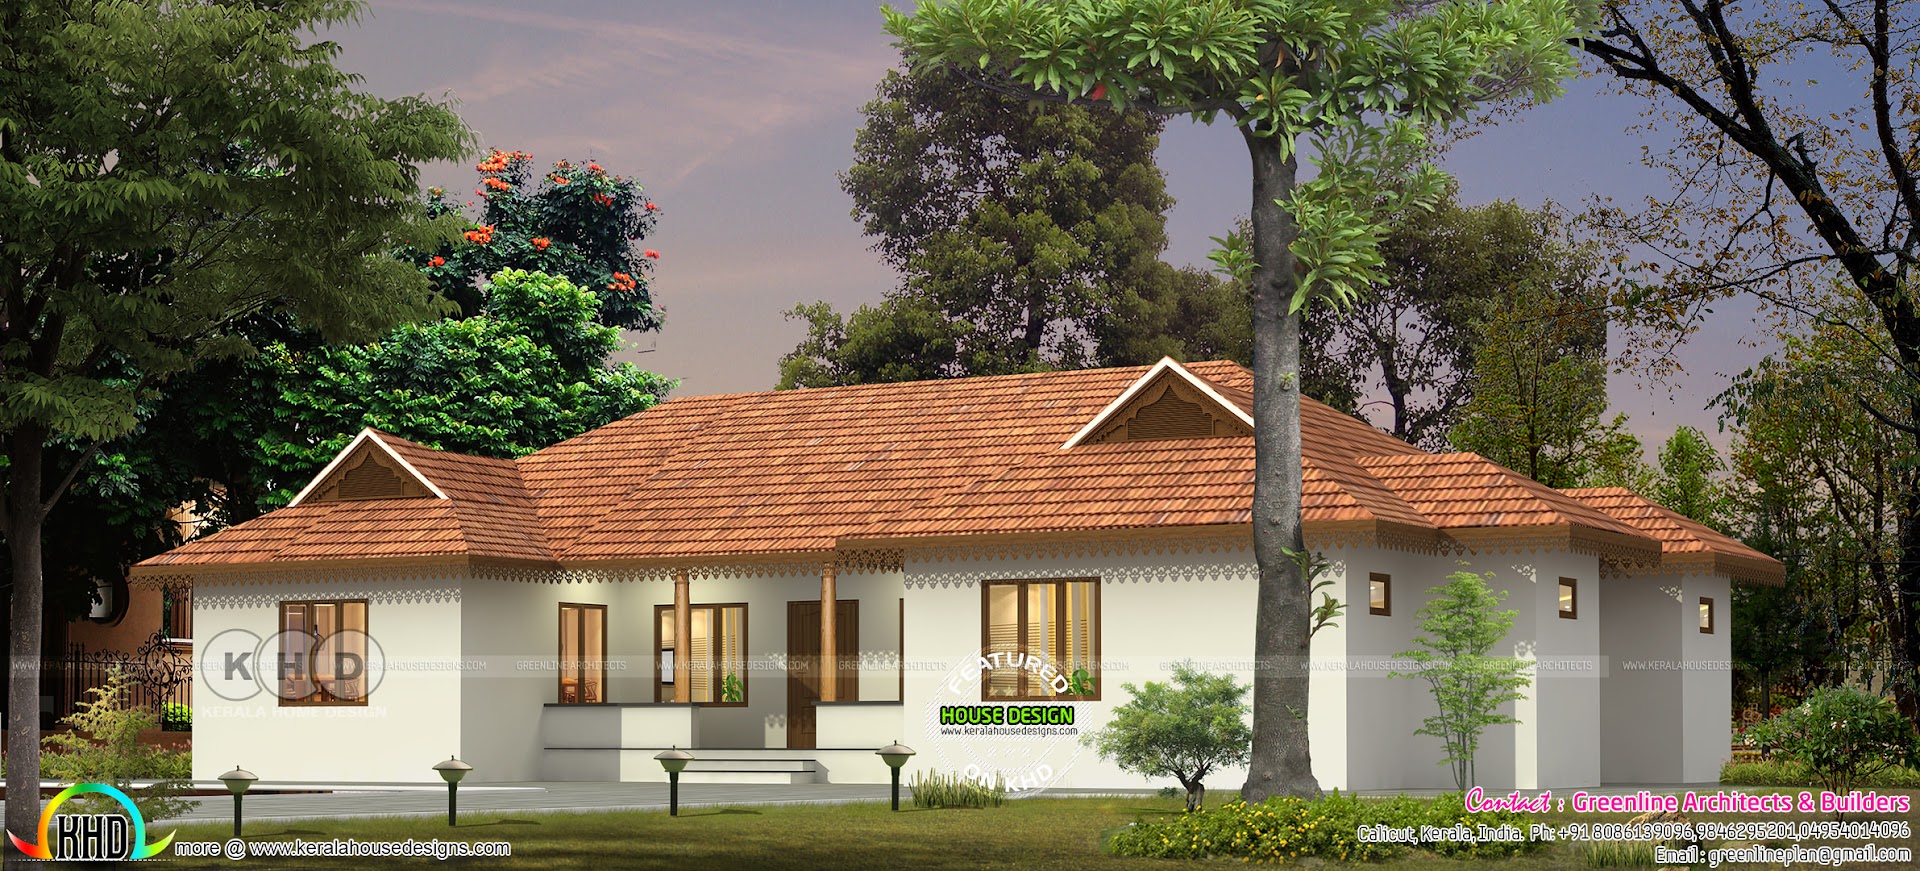 $45,000 cost estimated traditional home - Kerala home design and floor